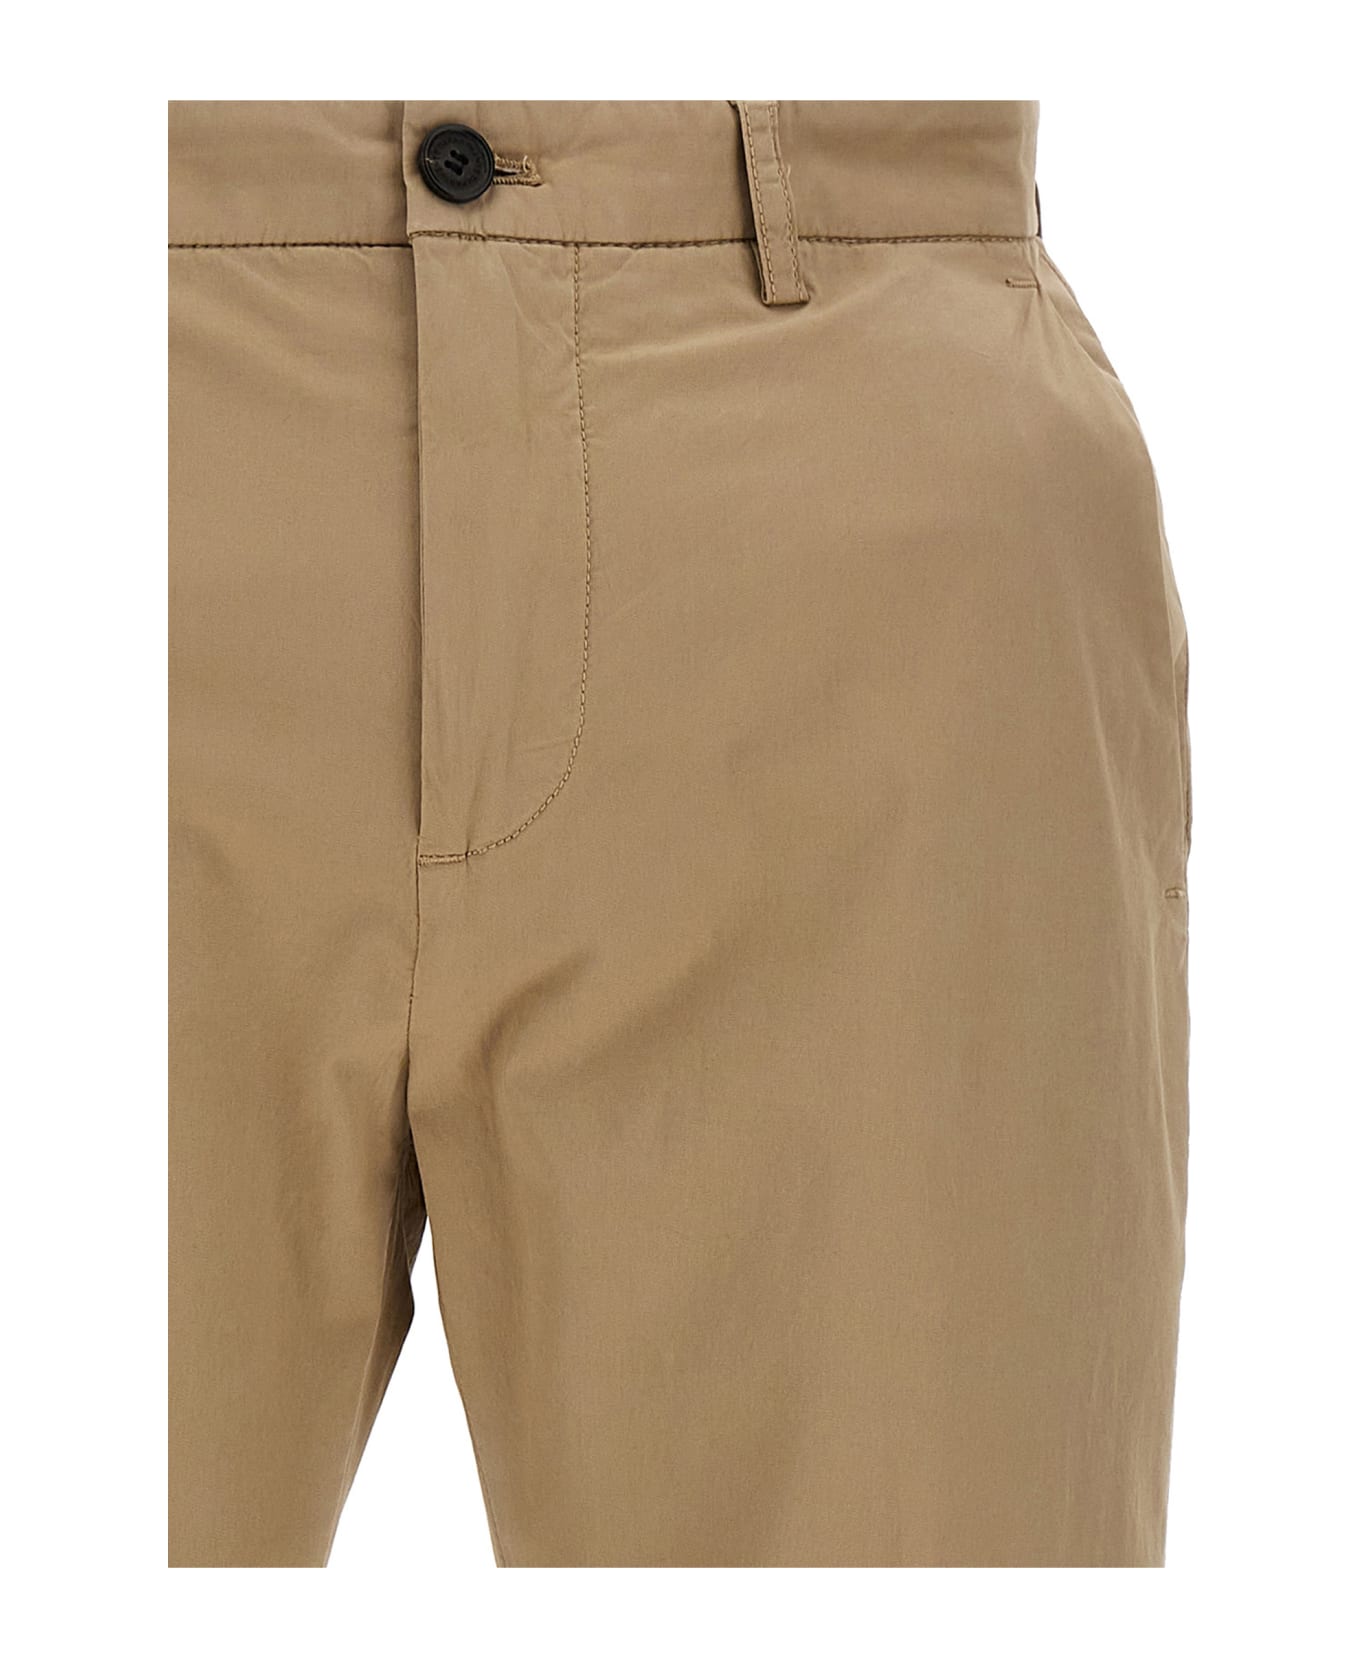 Department Five Prince' Pants - Beige ボトムス